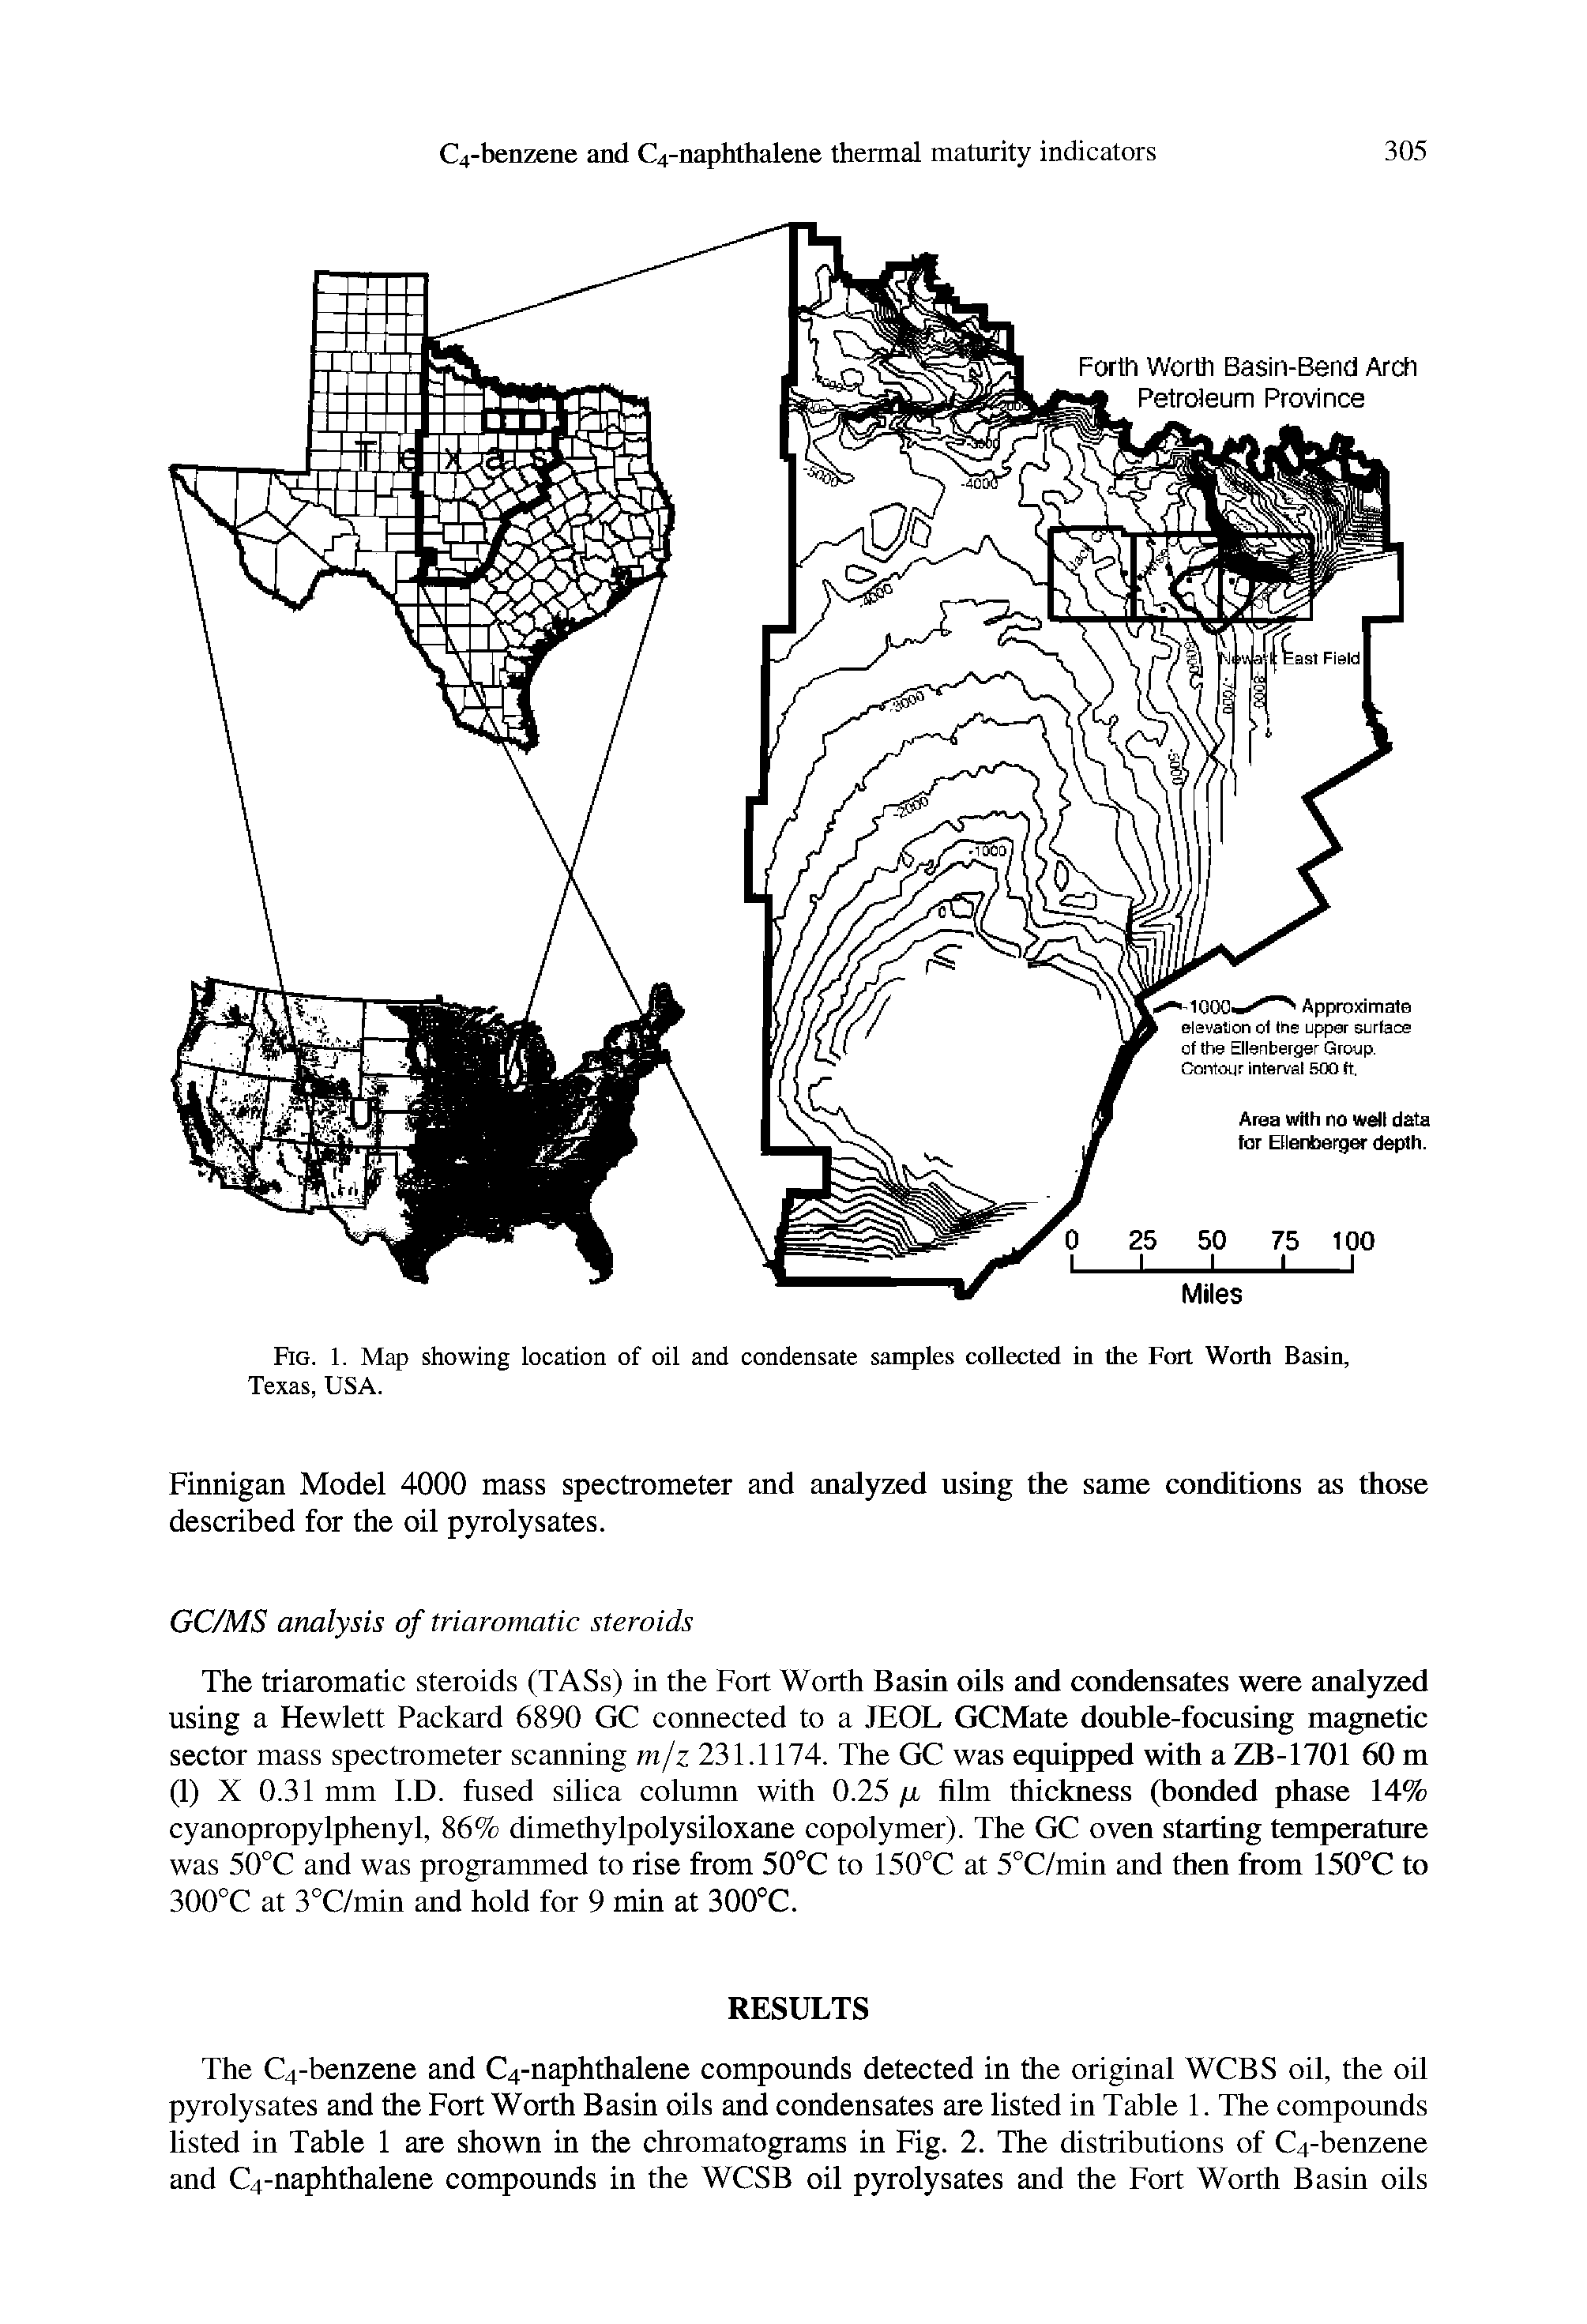 Fig. 1. Map showing location of oil and condensate samples collected in the Fort Worth Basin, Texas, USA.